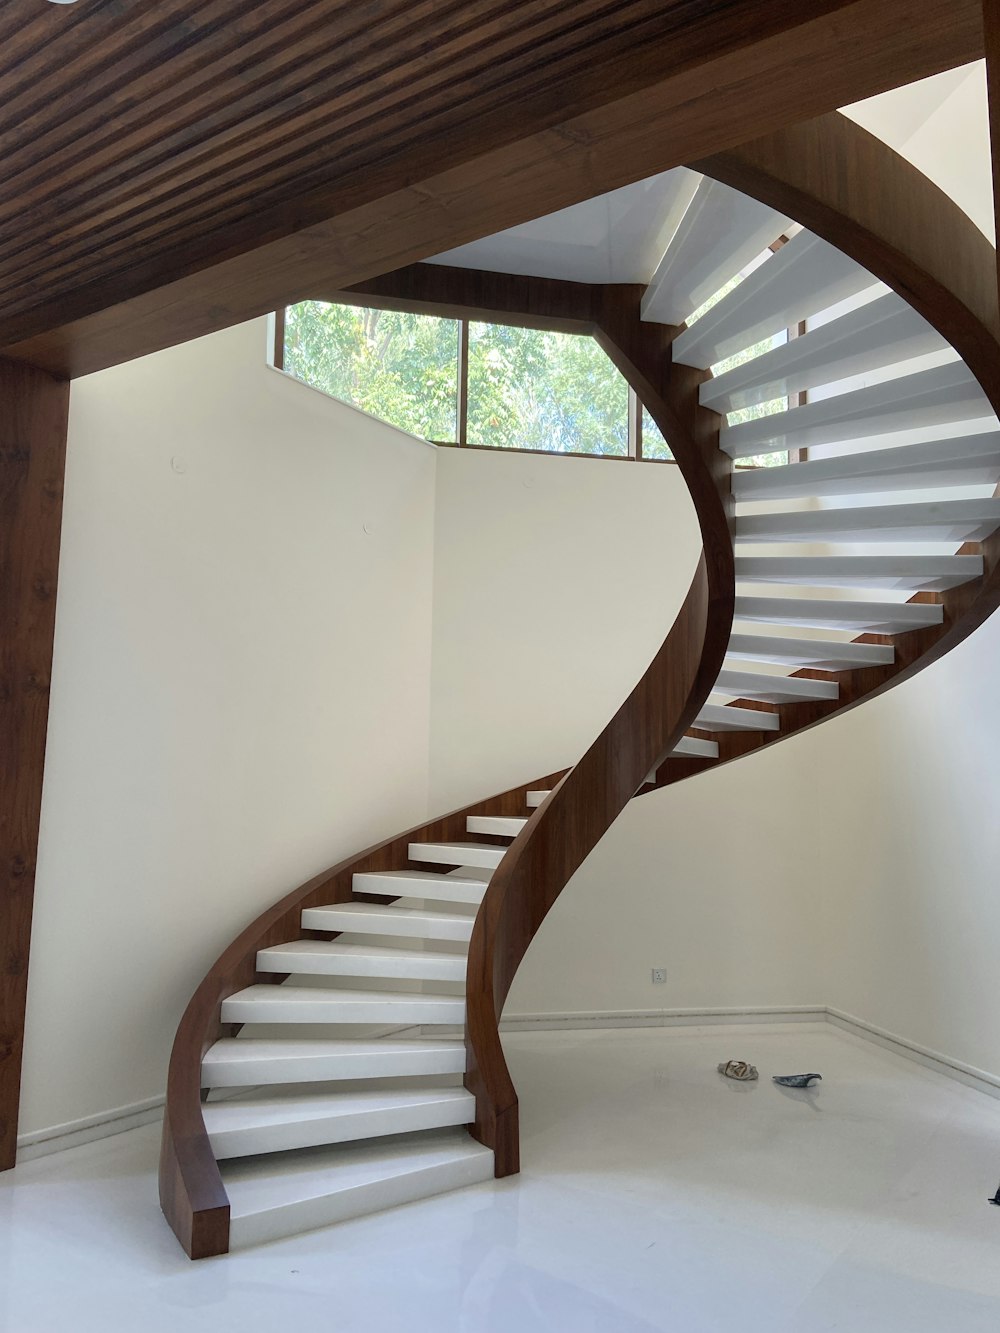 brown wooden spiral staircase on white painted wall